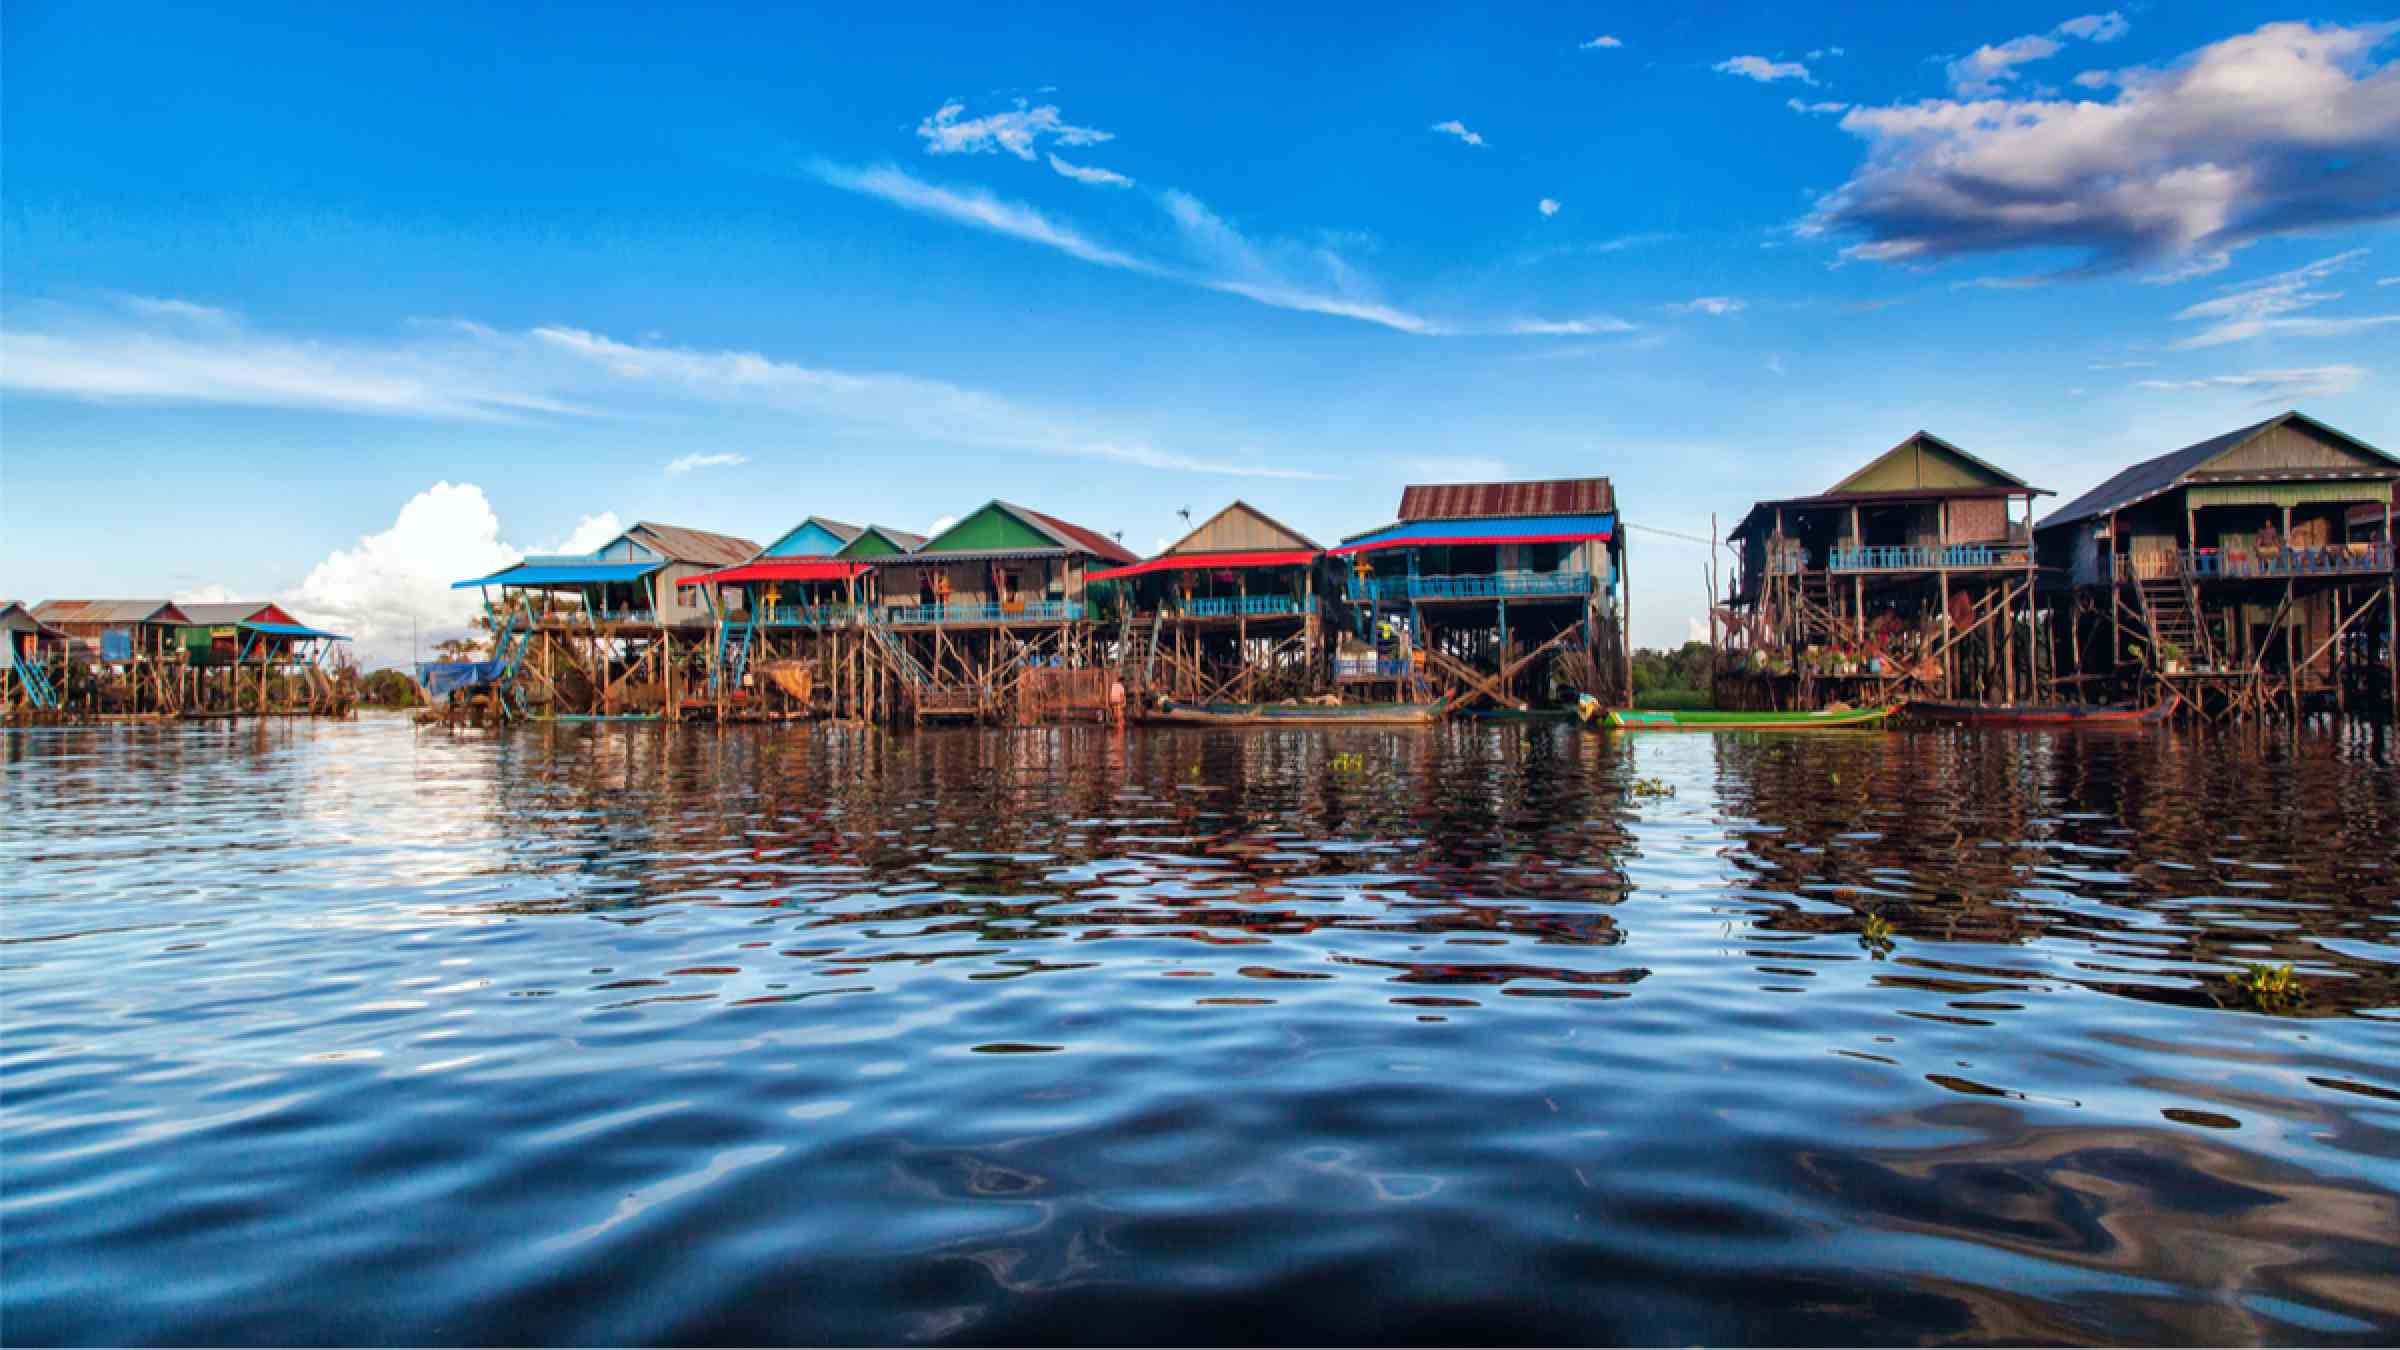 The floating village on the water of Tonle Sap Lake in Cambodia.